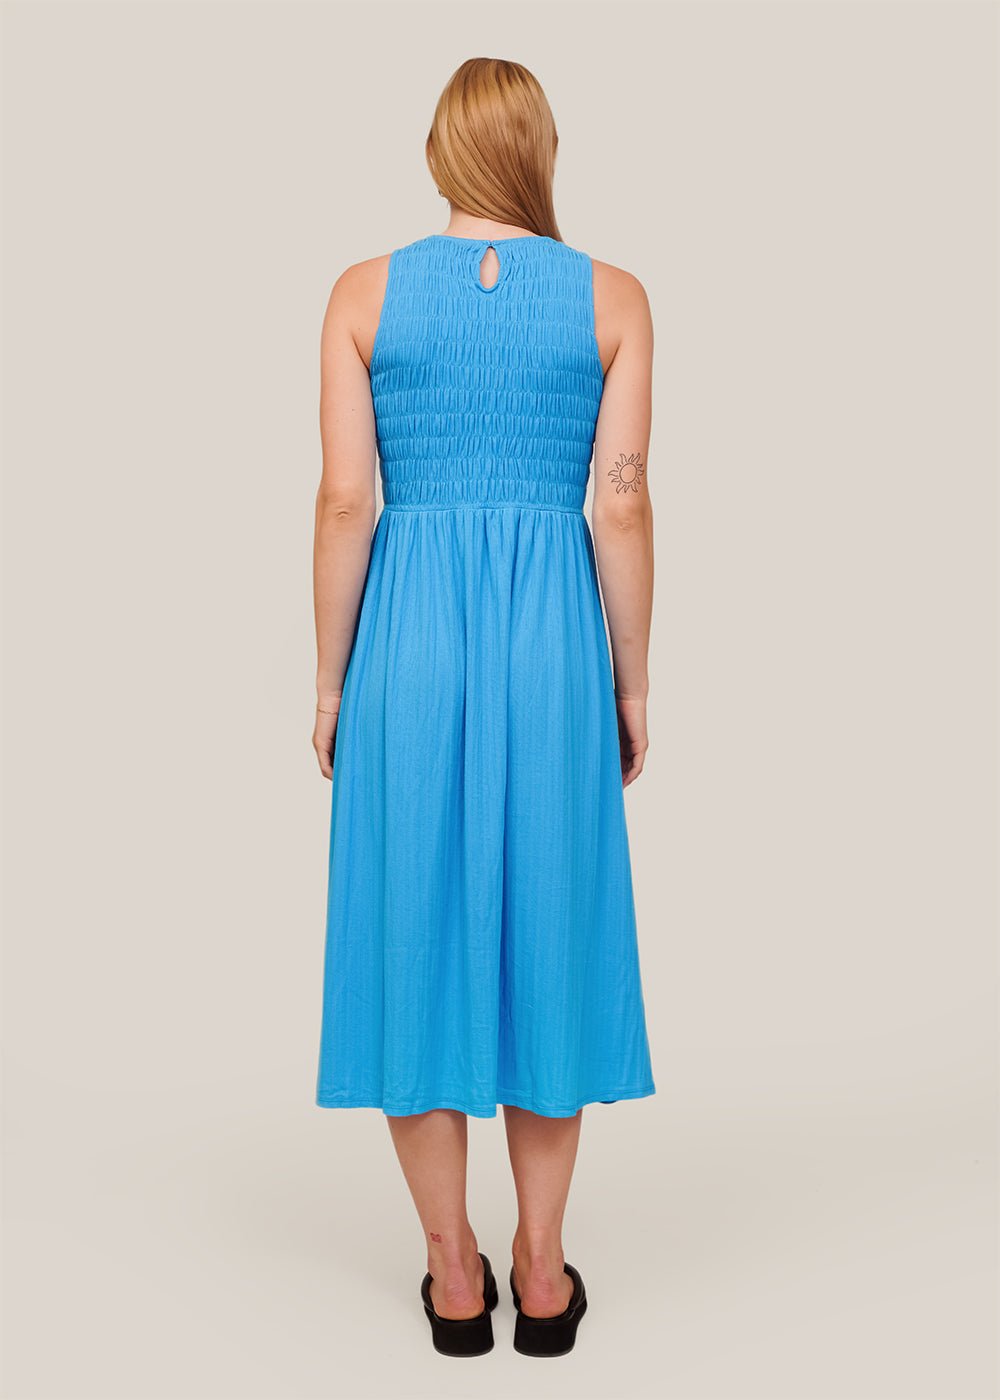 WRAY Ocean Flor Dress - New Classics Studios Sustainable Ethical Fashion Canada